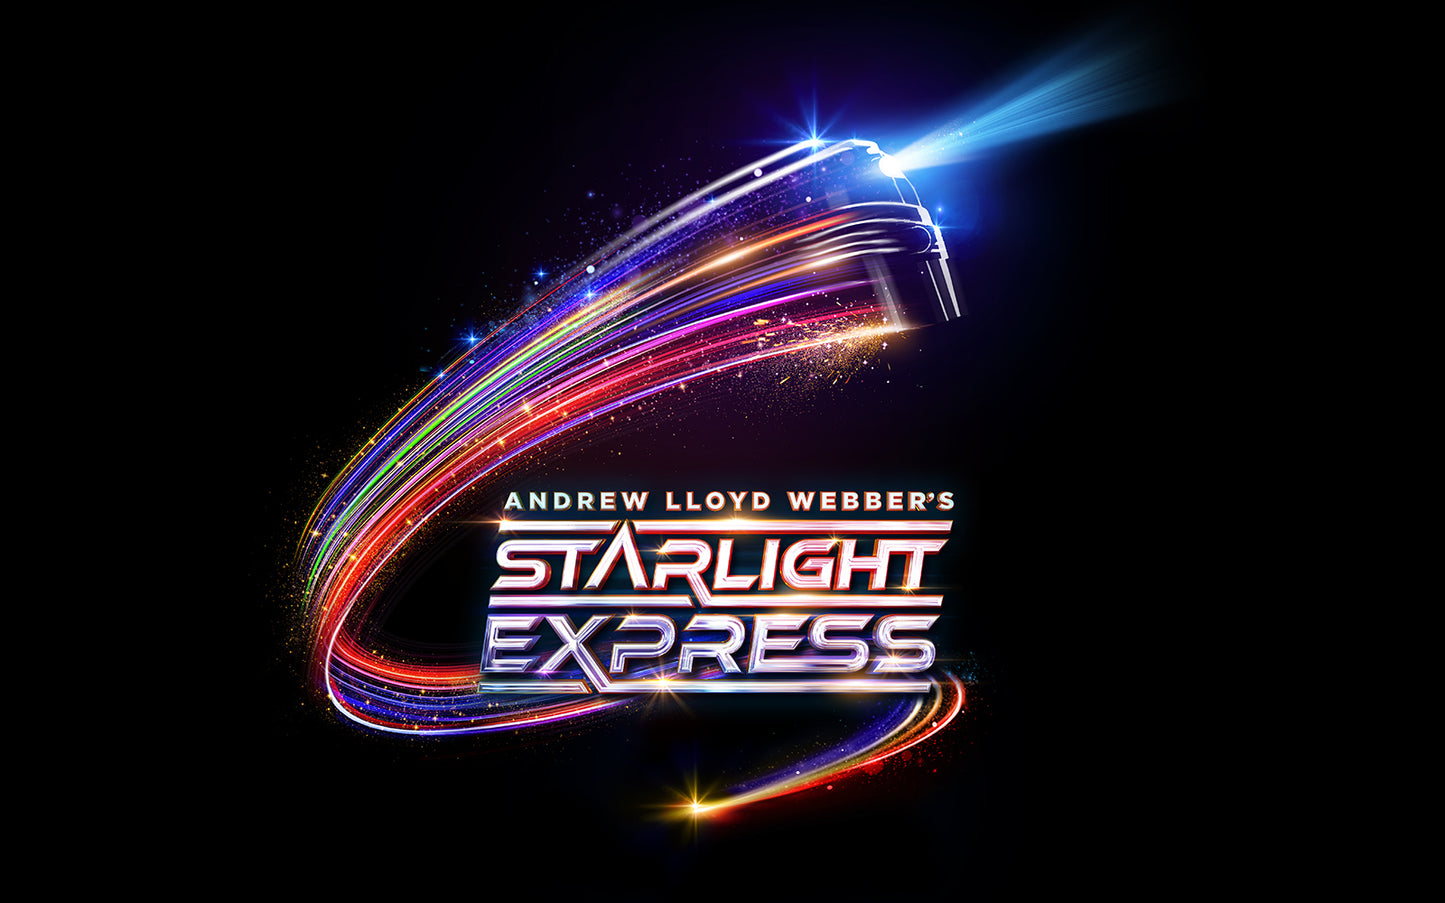 2nt: 4* London stay, breakfast & Starlight Express: £428 for two